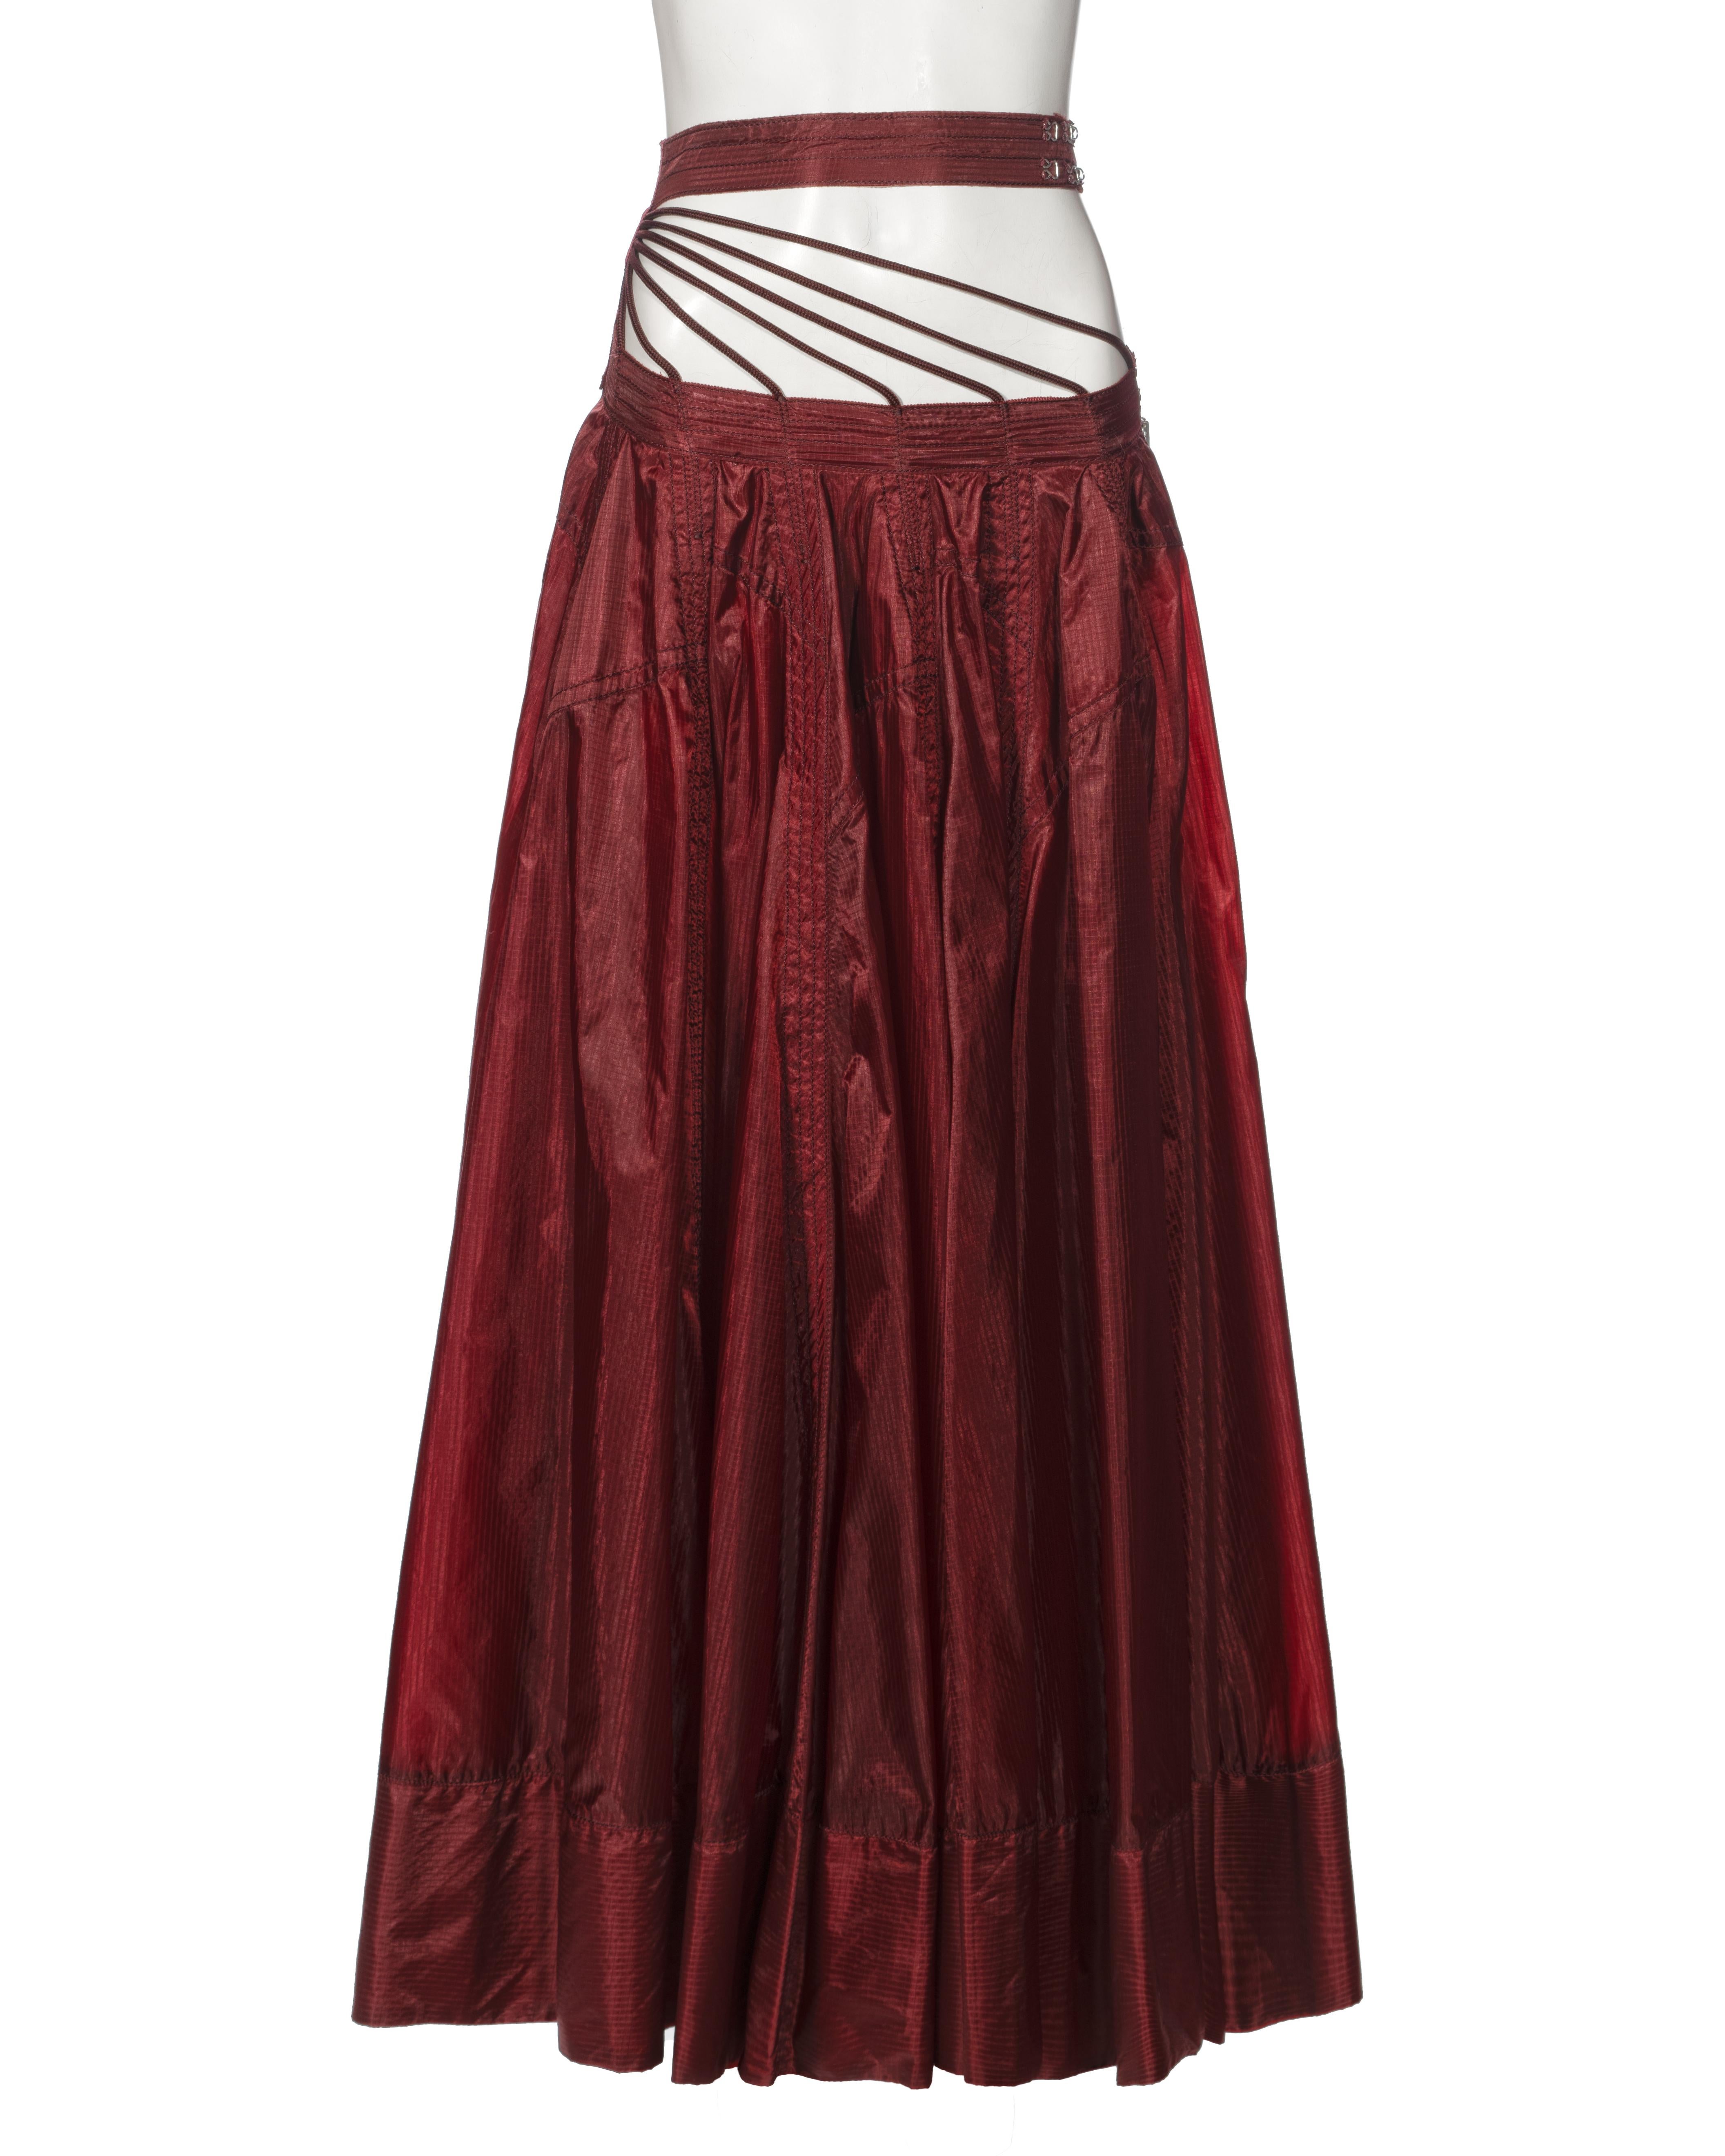 ▪ Archival Jean Paul Gaultier Skirt
▪ Spring-Summer 2002
▪ Sold by One of a Kind Archive
▪ Deep burgundy maxi skirt with a lustrous finish
▪ Strappy-waist detail linked to a separate waistband 
▪ Size zip closure 
▪ Material: Ripstop Nylon  
▪